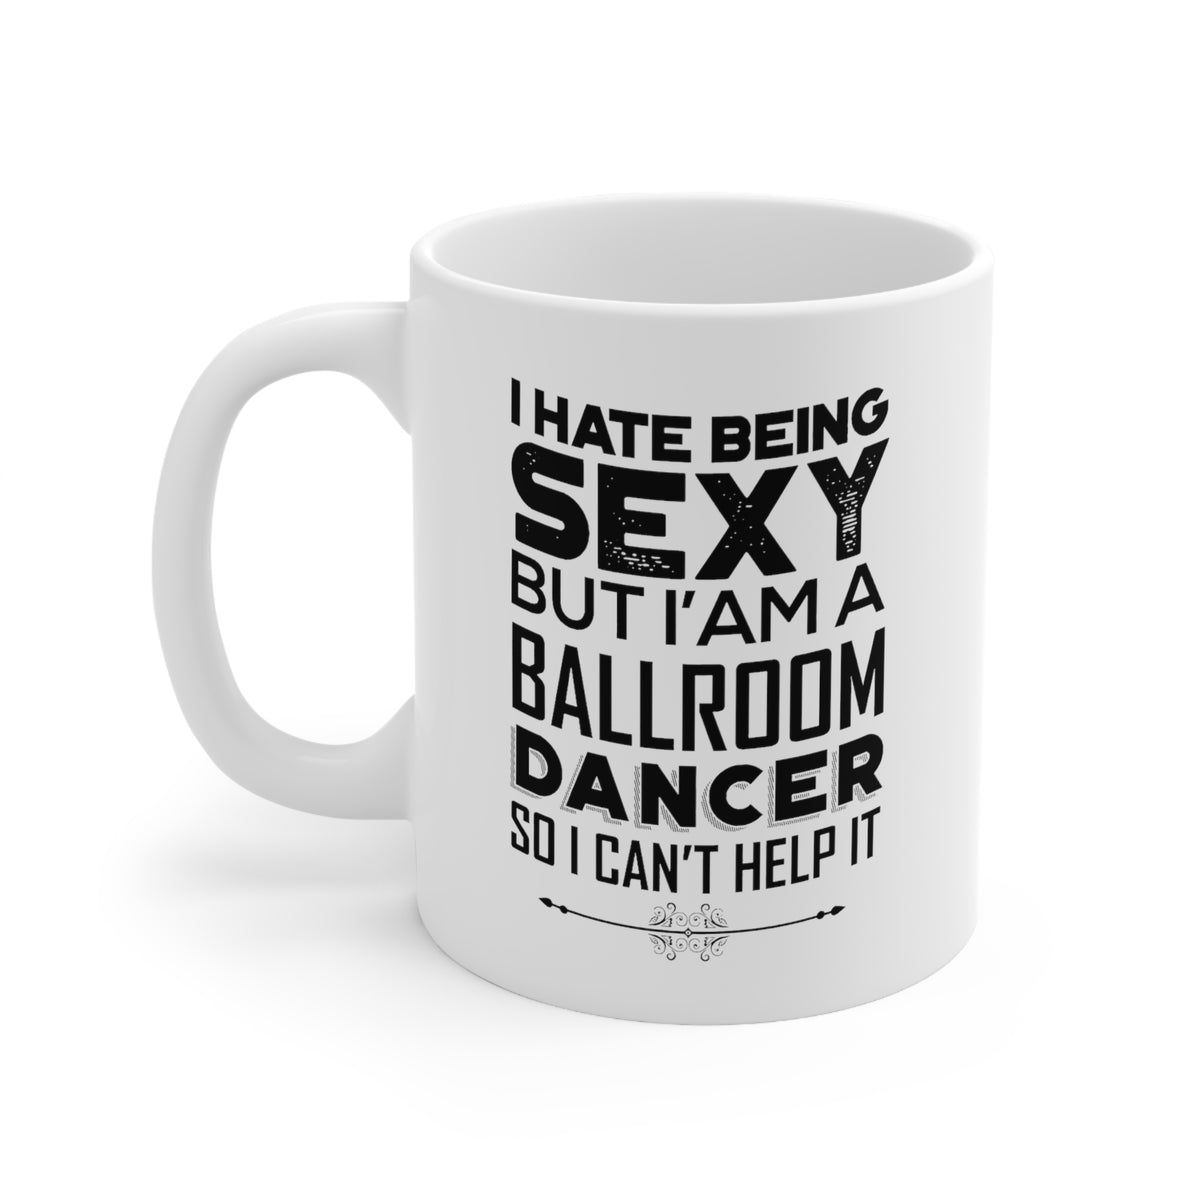 I Hate Being Sexy But I'm A Ballroom Dancer So I Can’t Help It - Perfect Tea Cup & Coffee Mug For Dancer